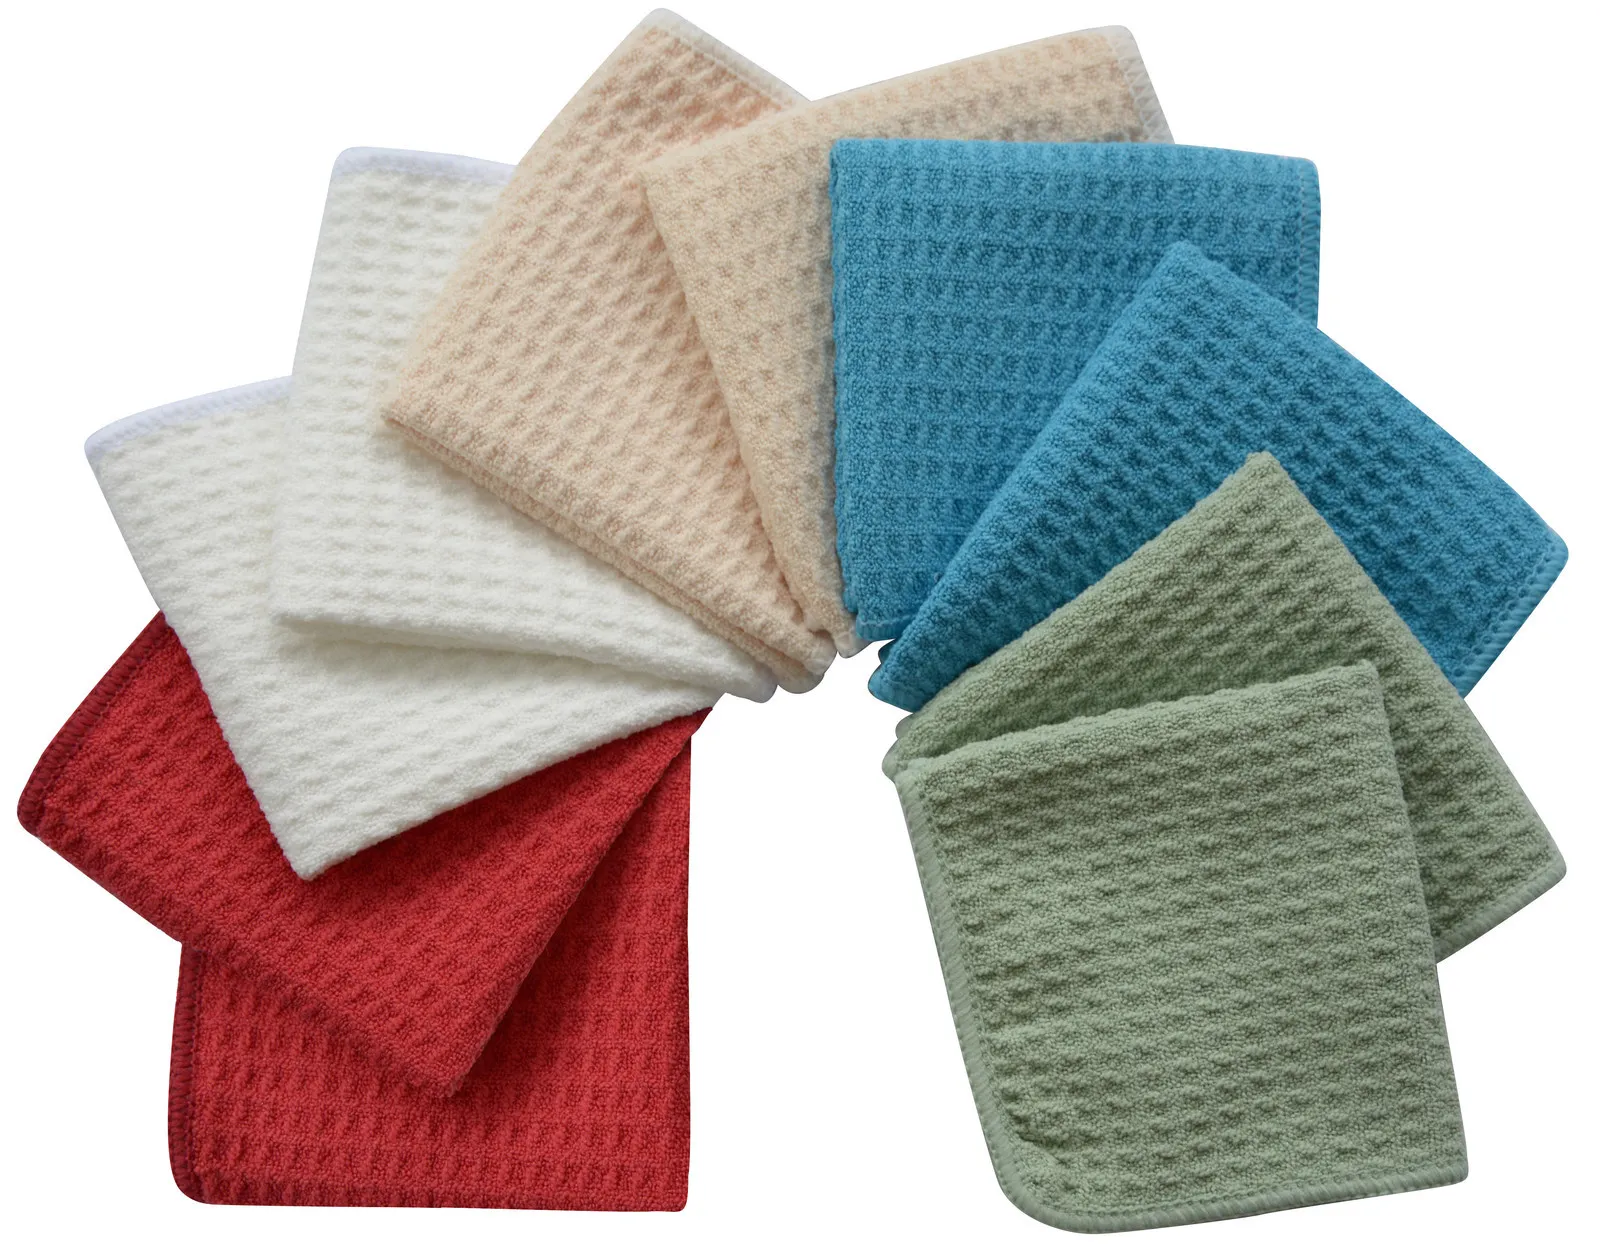 Sinland Home Microfiber Waffle Weave Dish Cloths Cleaning Cloth Soft Kitchen Dish Rags Fast Drying Towels 8Inchx8Inch 10 Pieces 201021